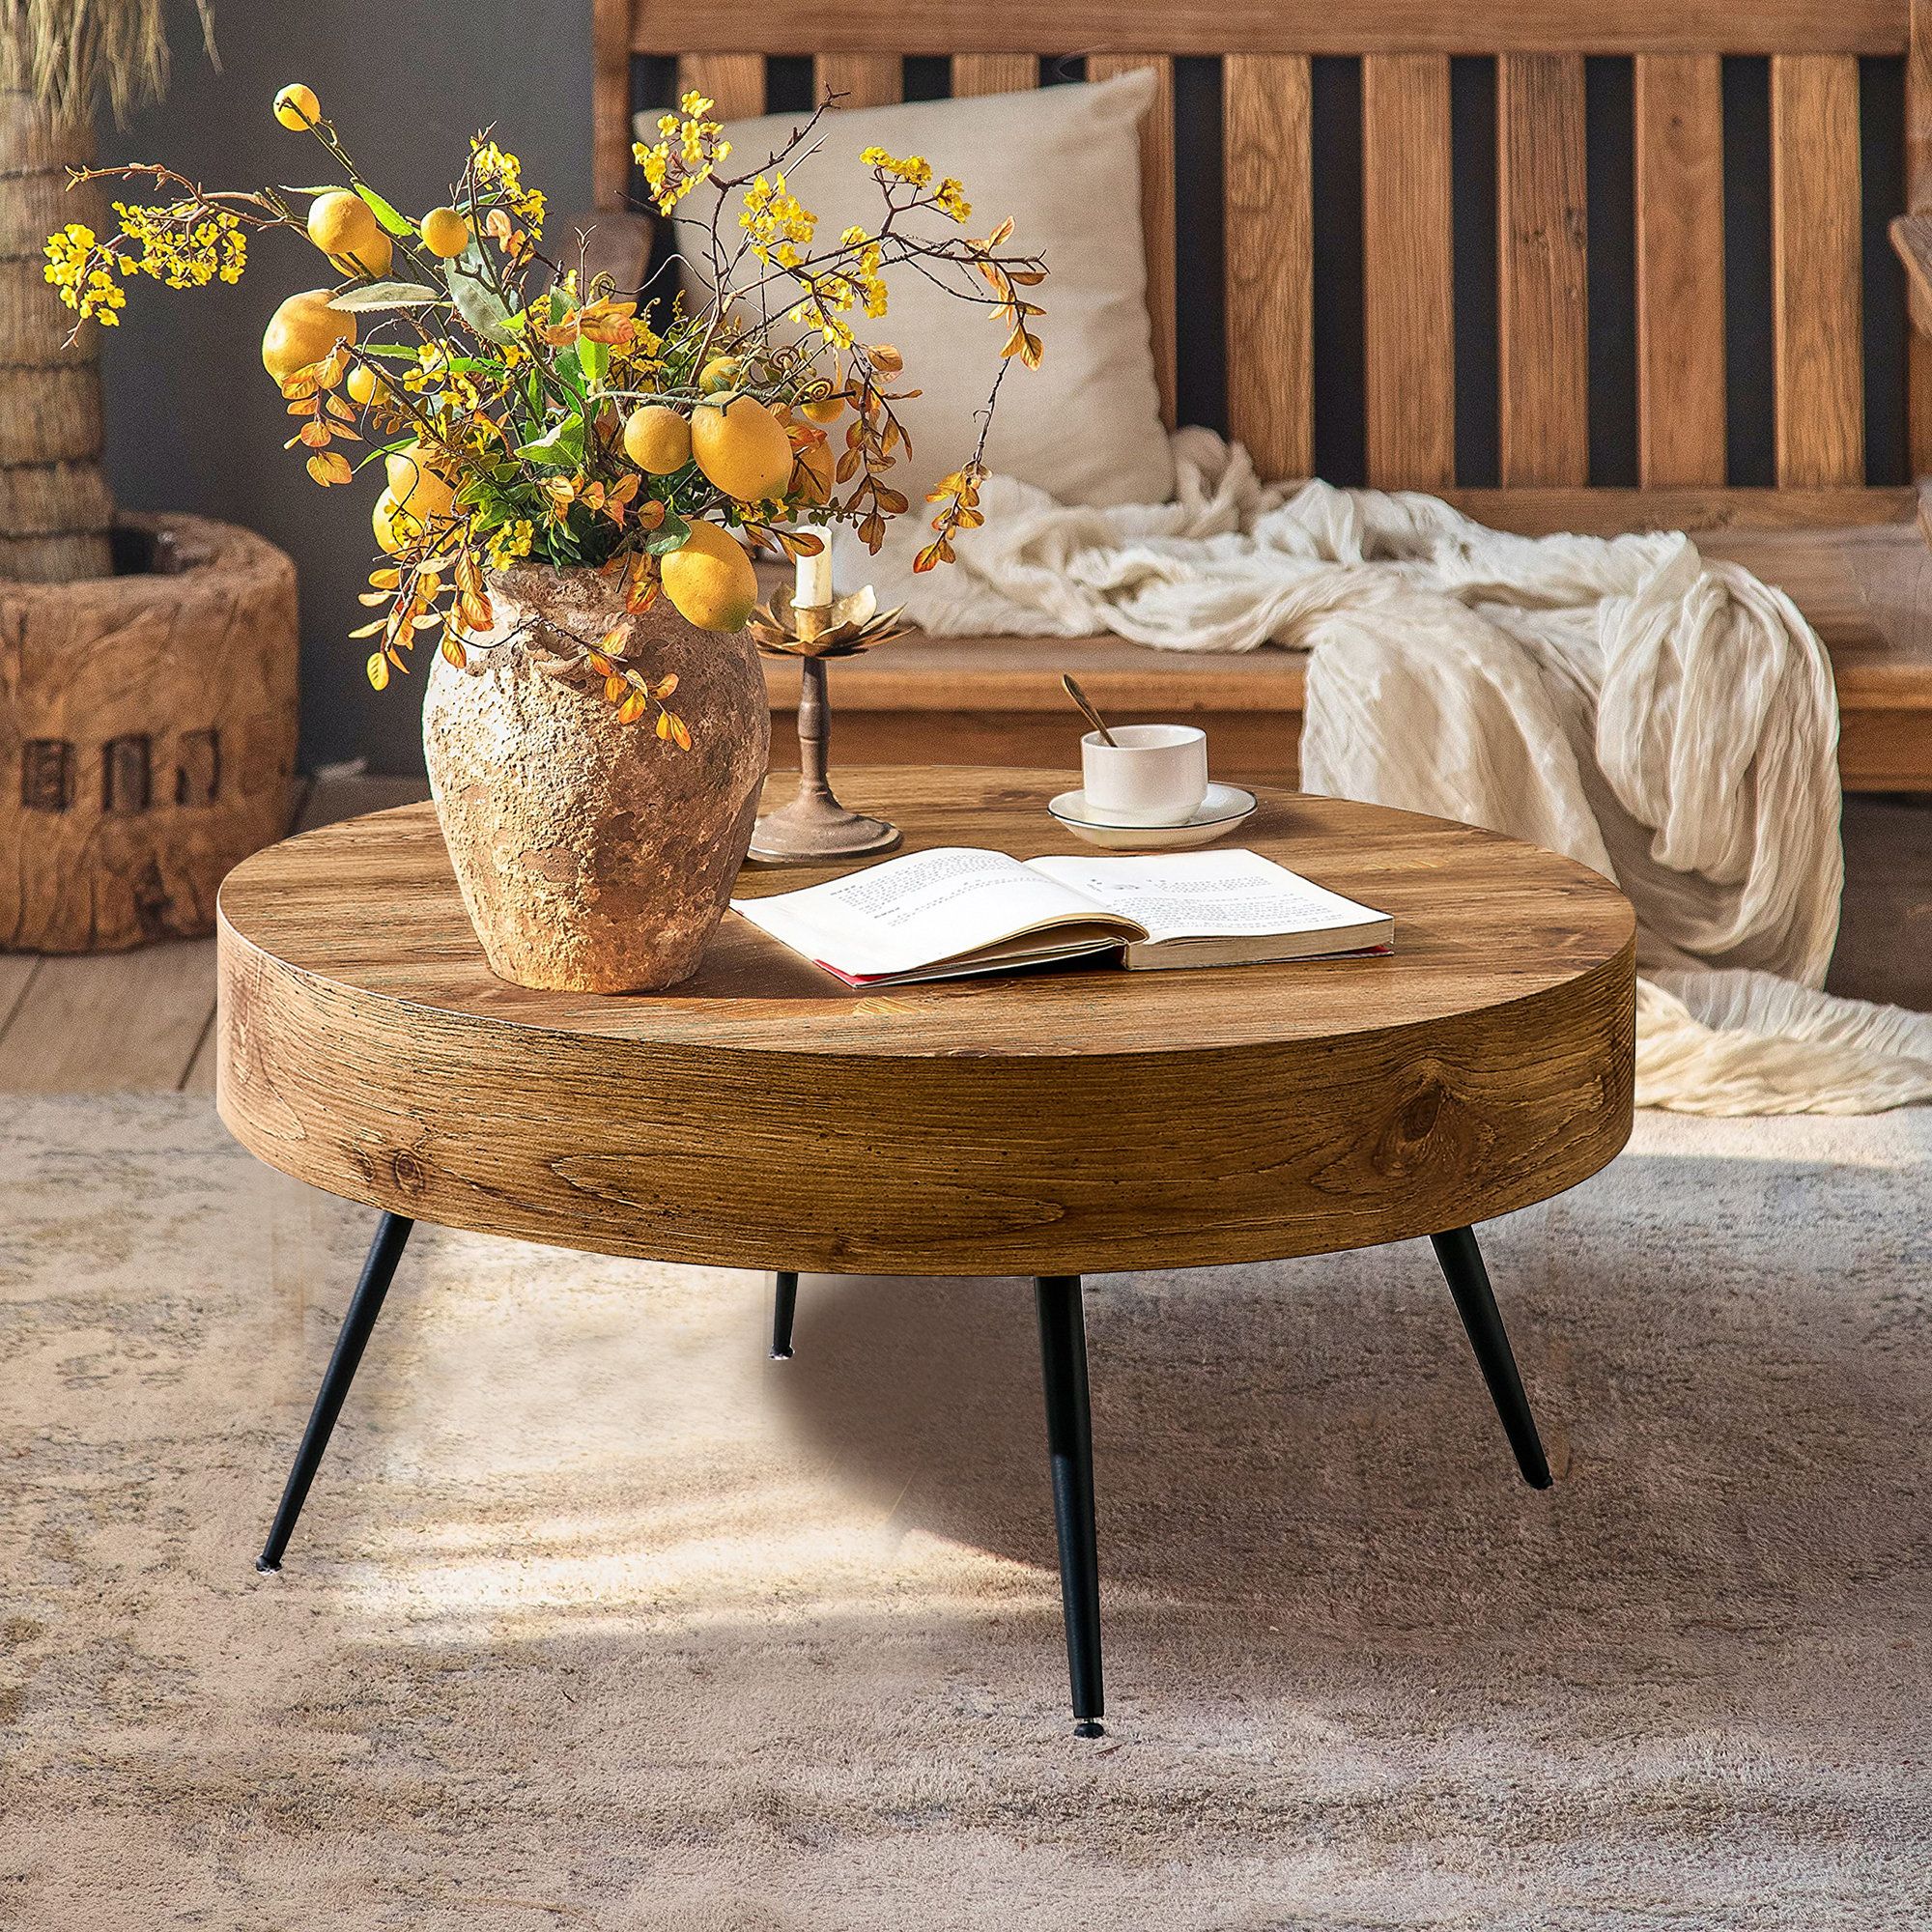 Millwood Pines Arnita Farmhouse Round Coffee Table, Cocktail Table, Modern  Circle Natural Wood Finish Side End Table | Wayfair Pertaining To Modern Farmhouse Coffee Table Sets (View 10 of 15)